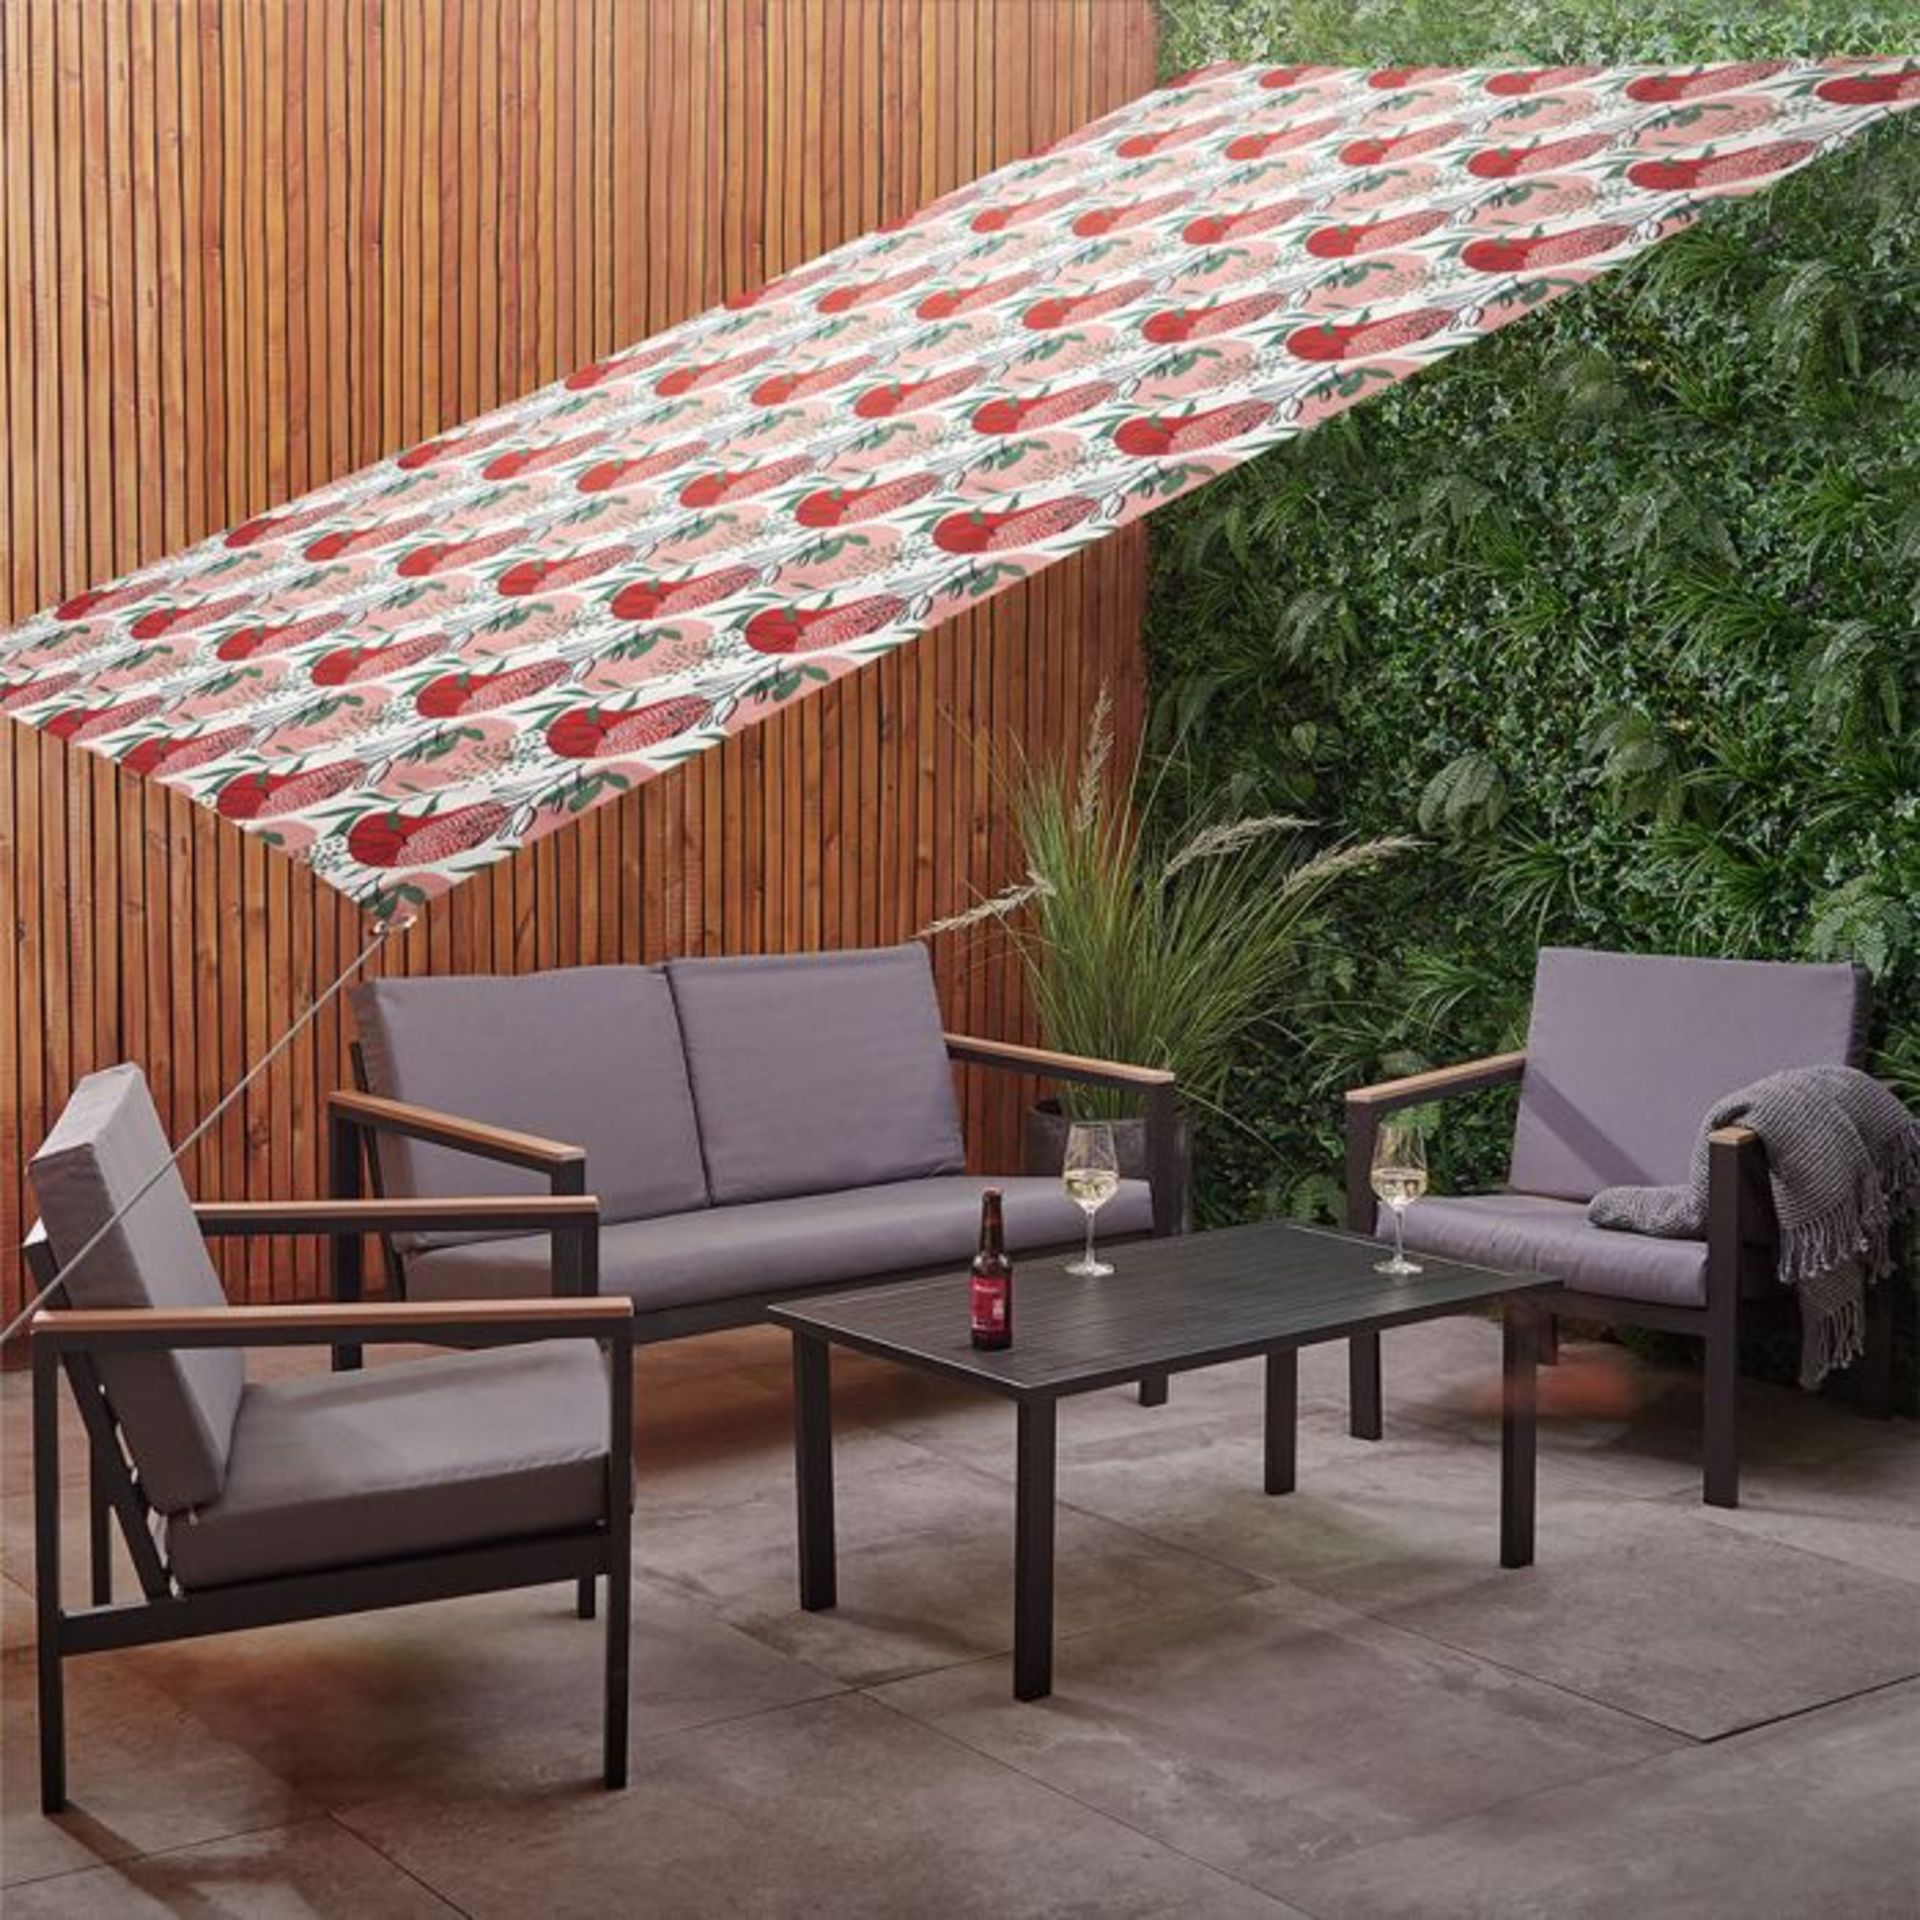 TRADE LOT 24 x New & Packaged Botanical Print 2x3m Sun Shade Sail (250662). Tired of your parasol